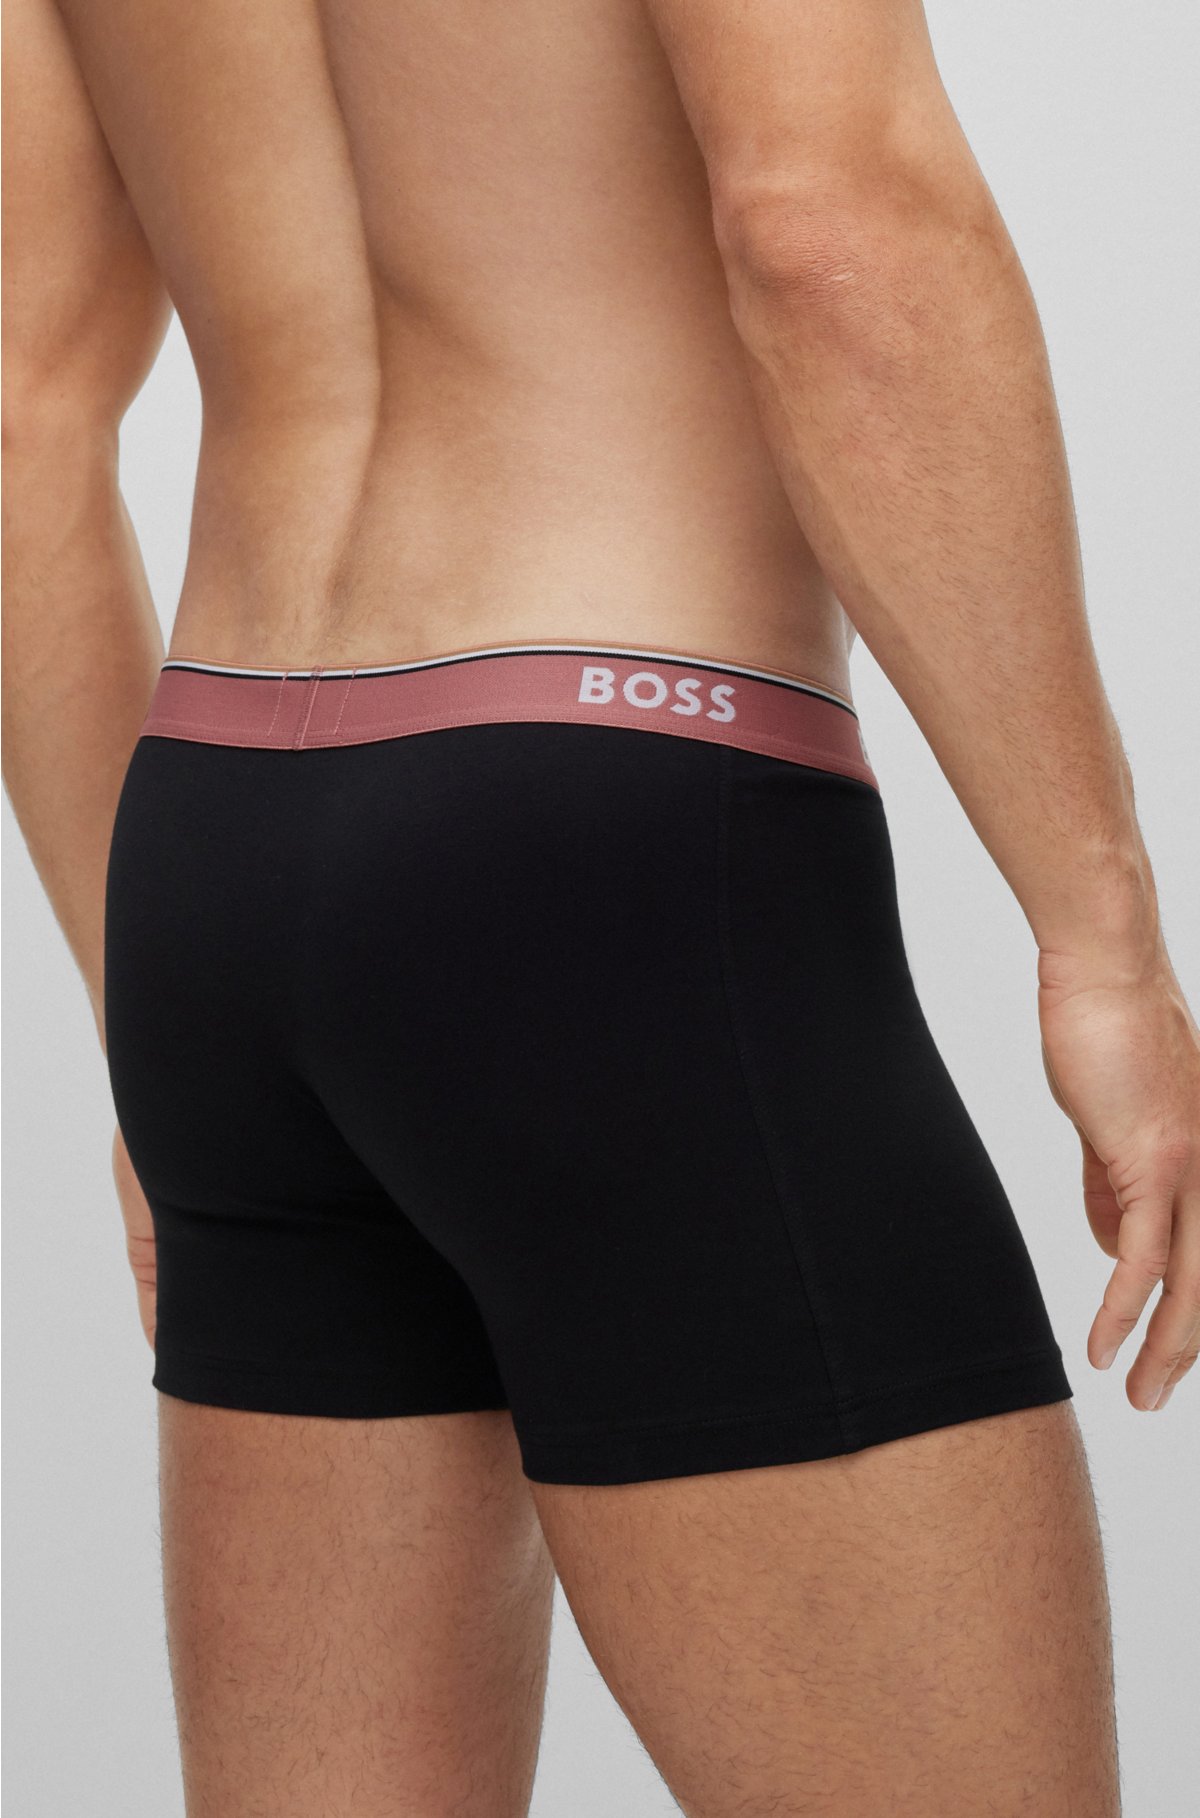 BOSS - Three-pack briefs logo boxer of with waistbands